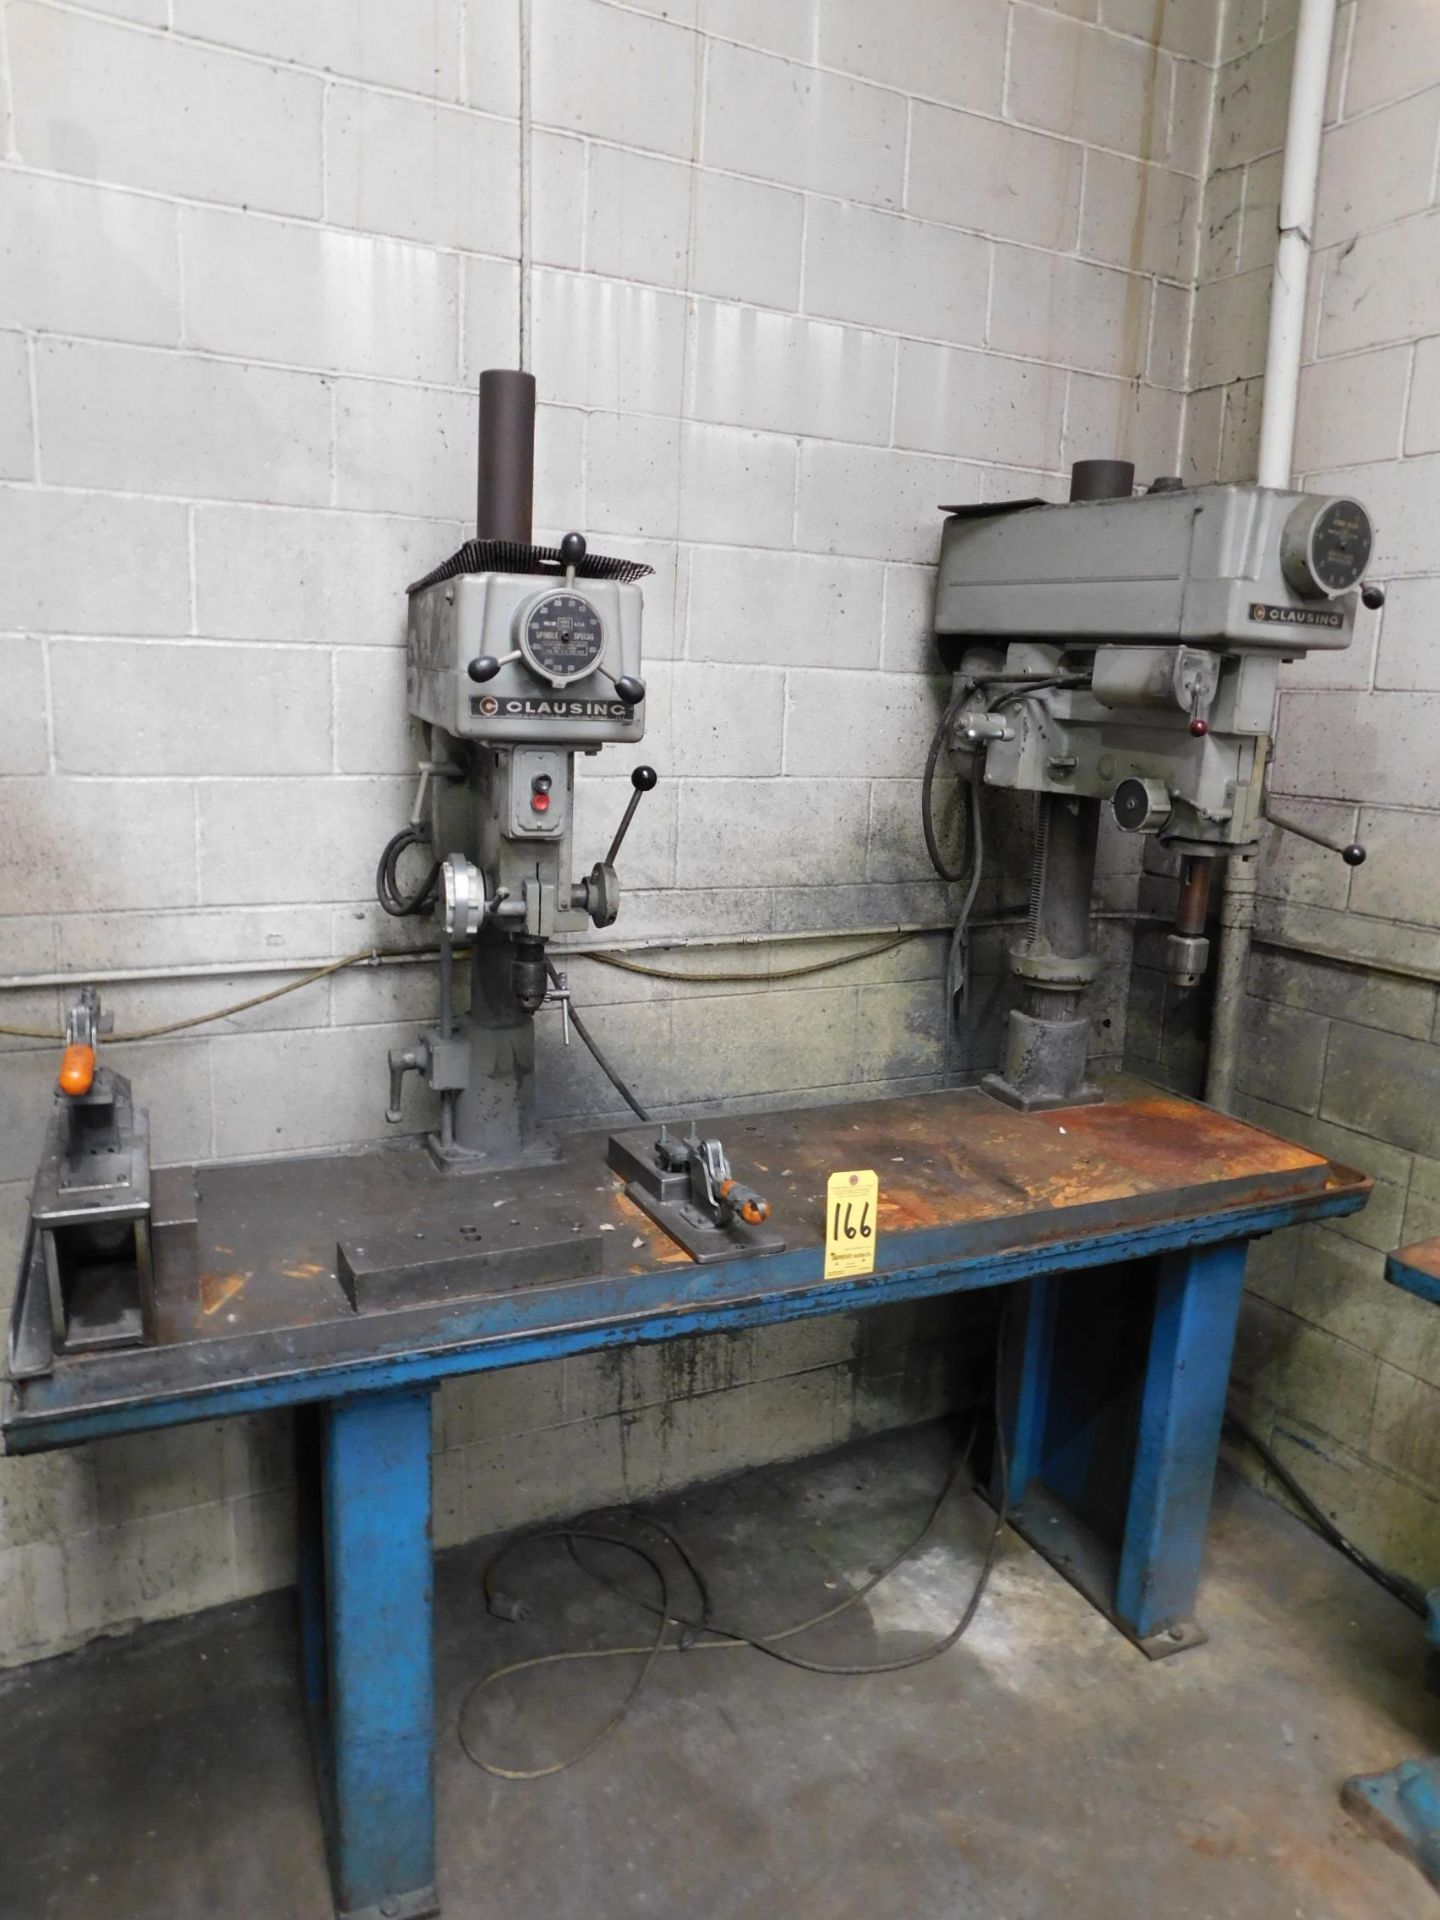 Clausing 2-Spindle Drill Press, (1) 15" Head, (1) 20" Head, Mounted on 20" X 72" Table